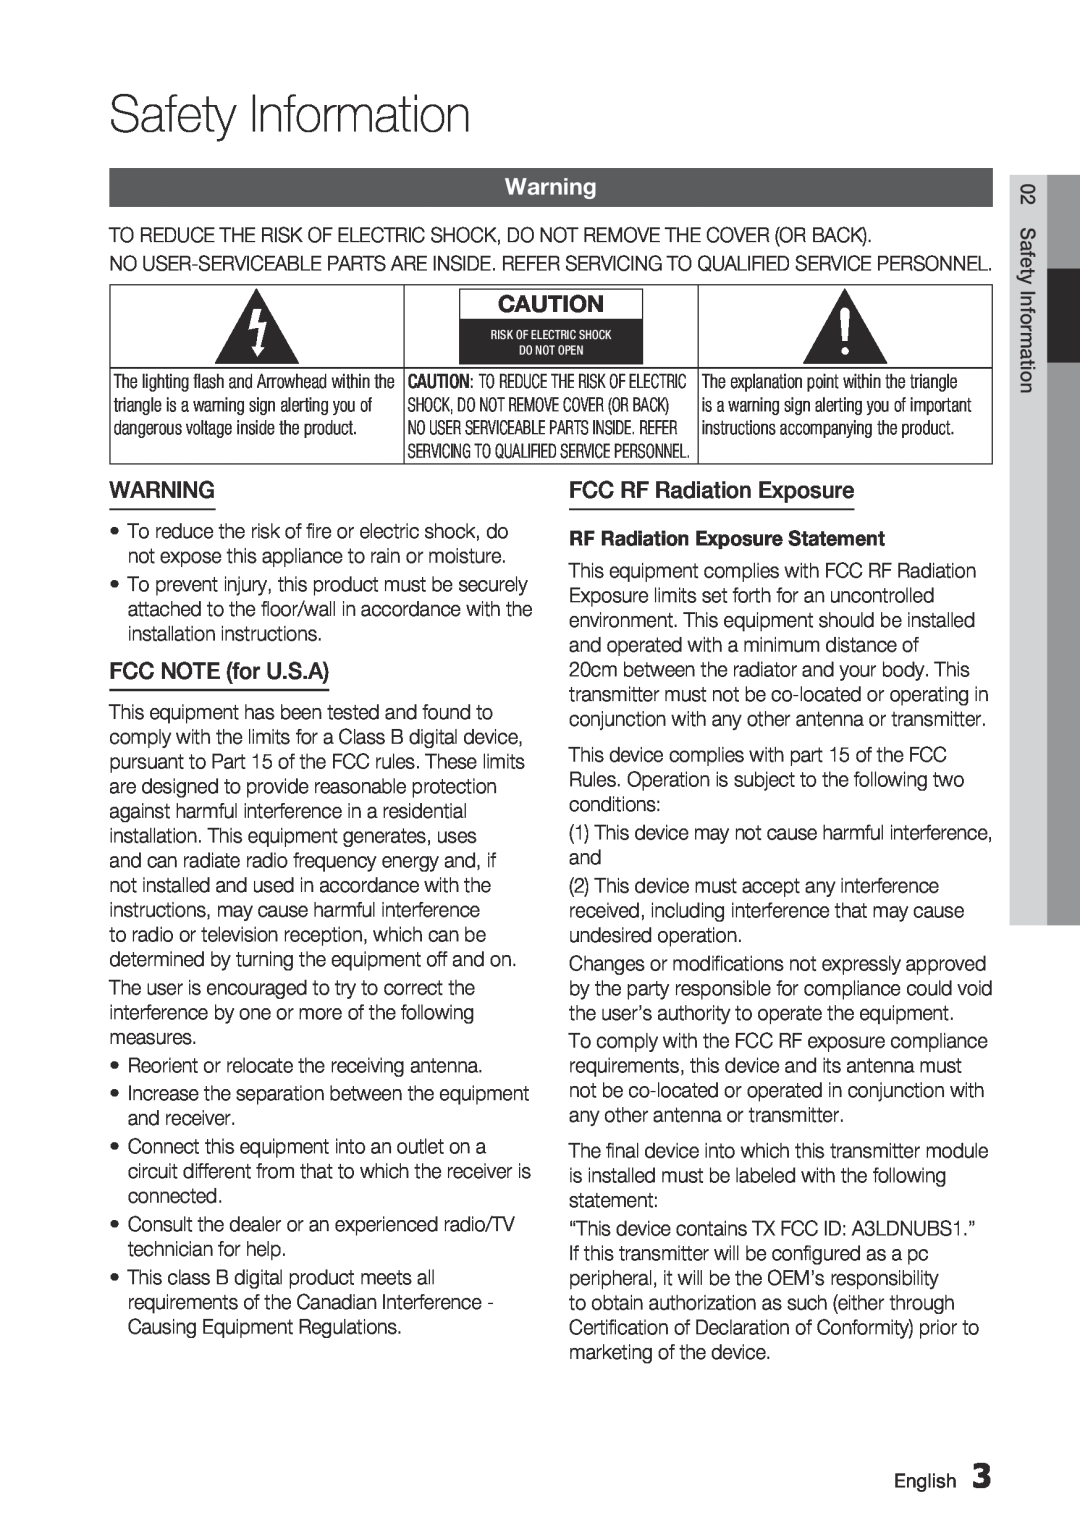 Samsung BD-C7500/XAA Safety Information, FCC RF Radiation Exposure, FCC NOTE for U.S.A, RF Radiation Exposure Statement 